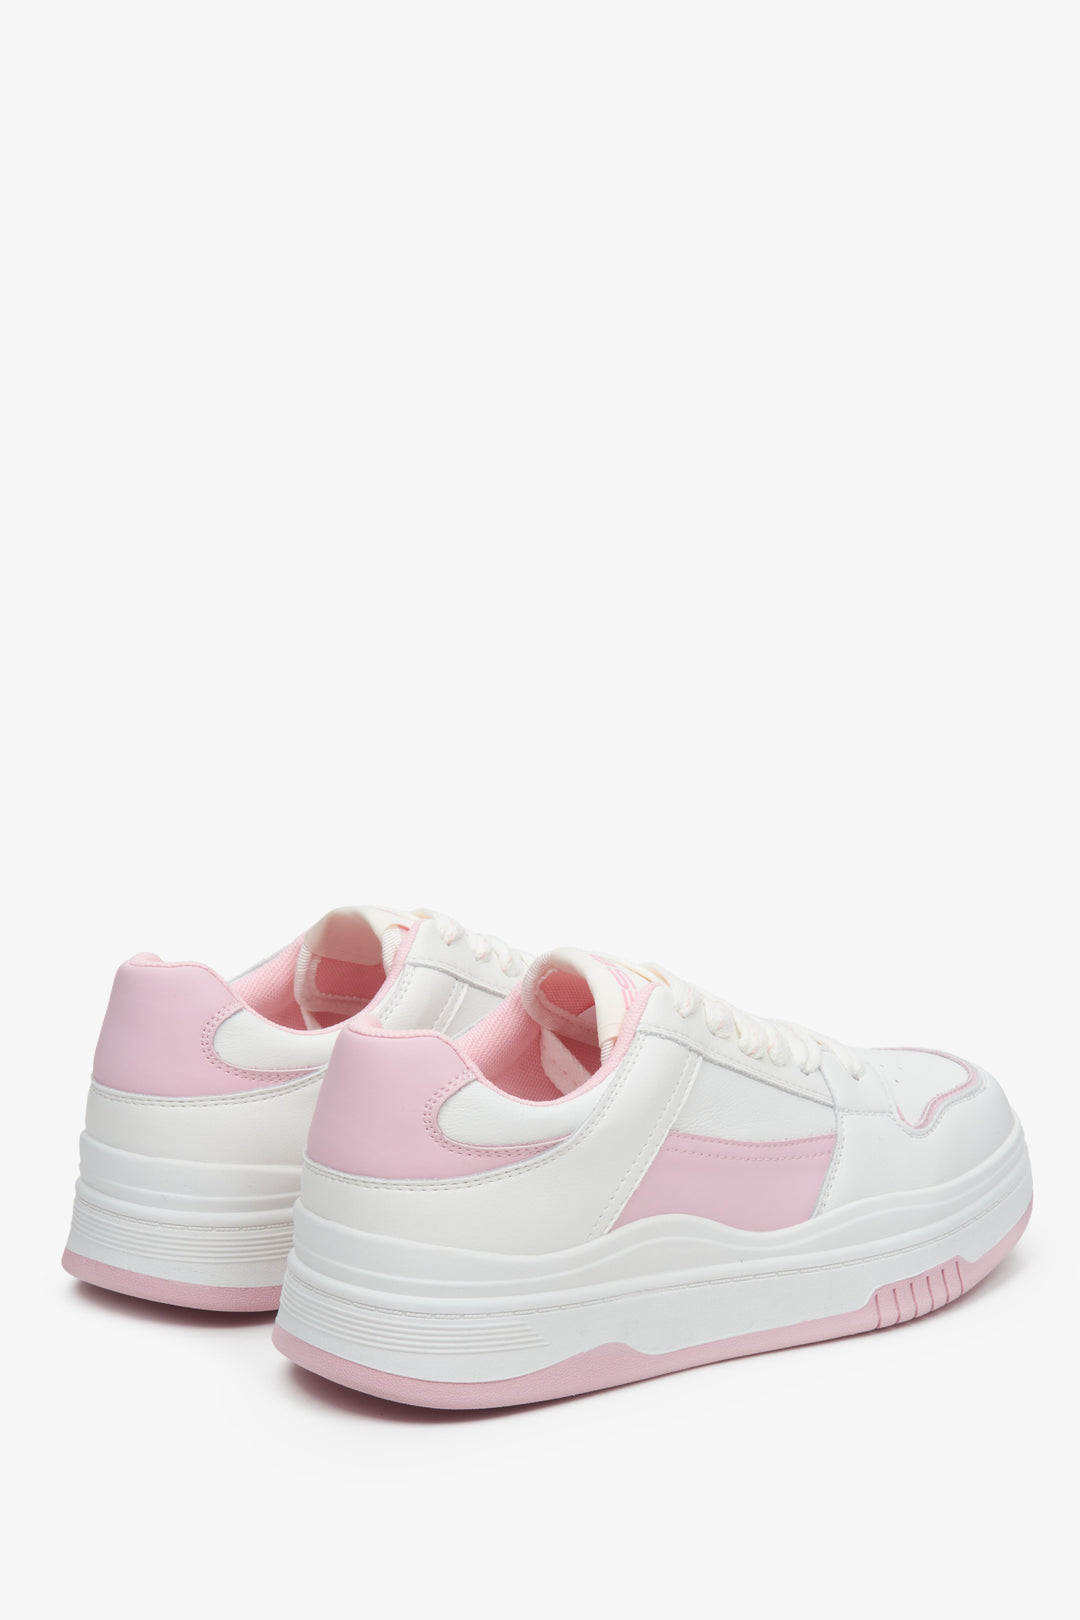 Women's white and pink sneakers made of leather.